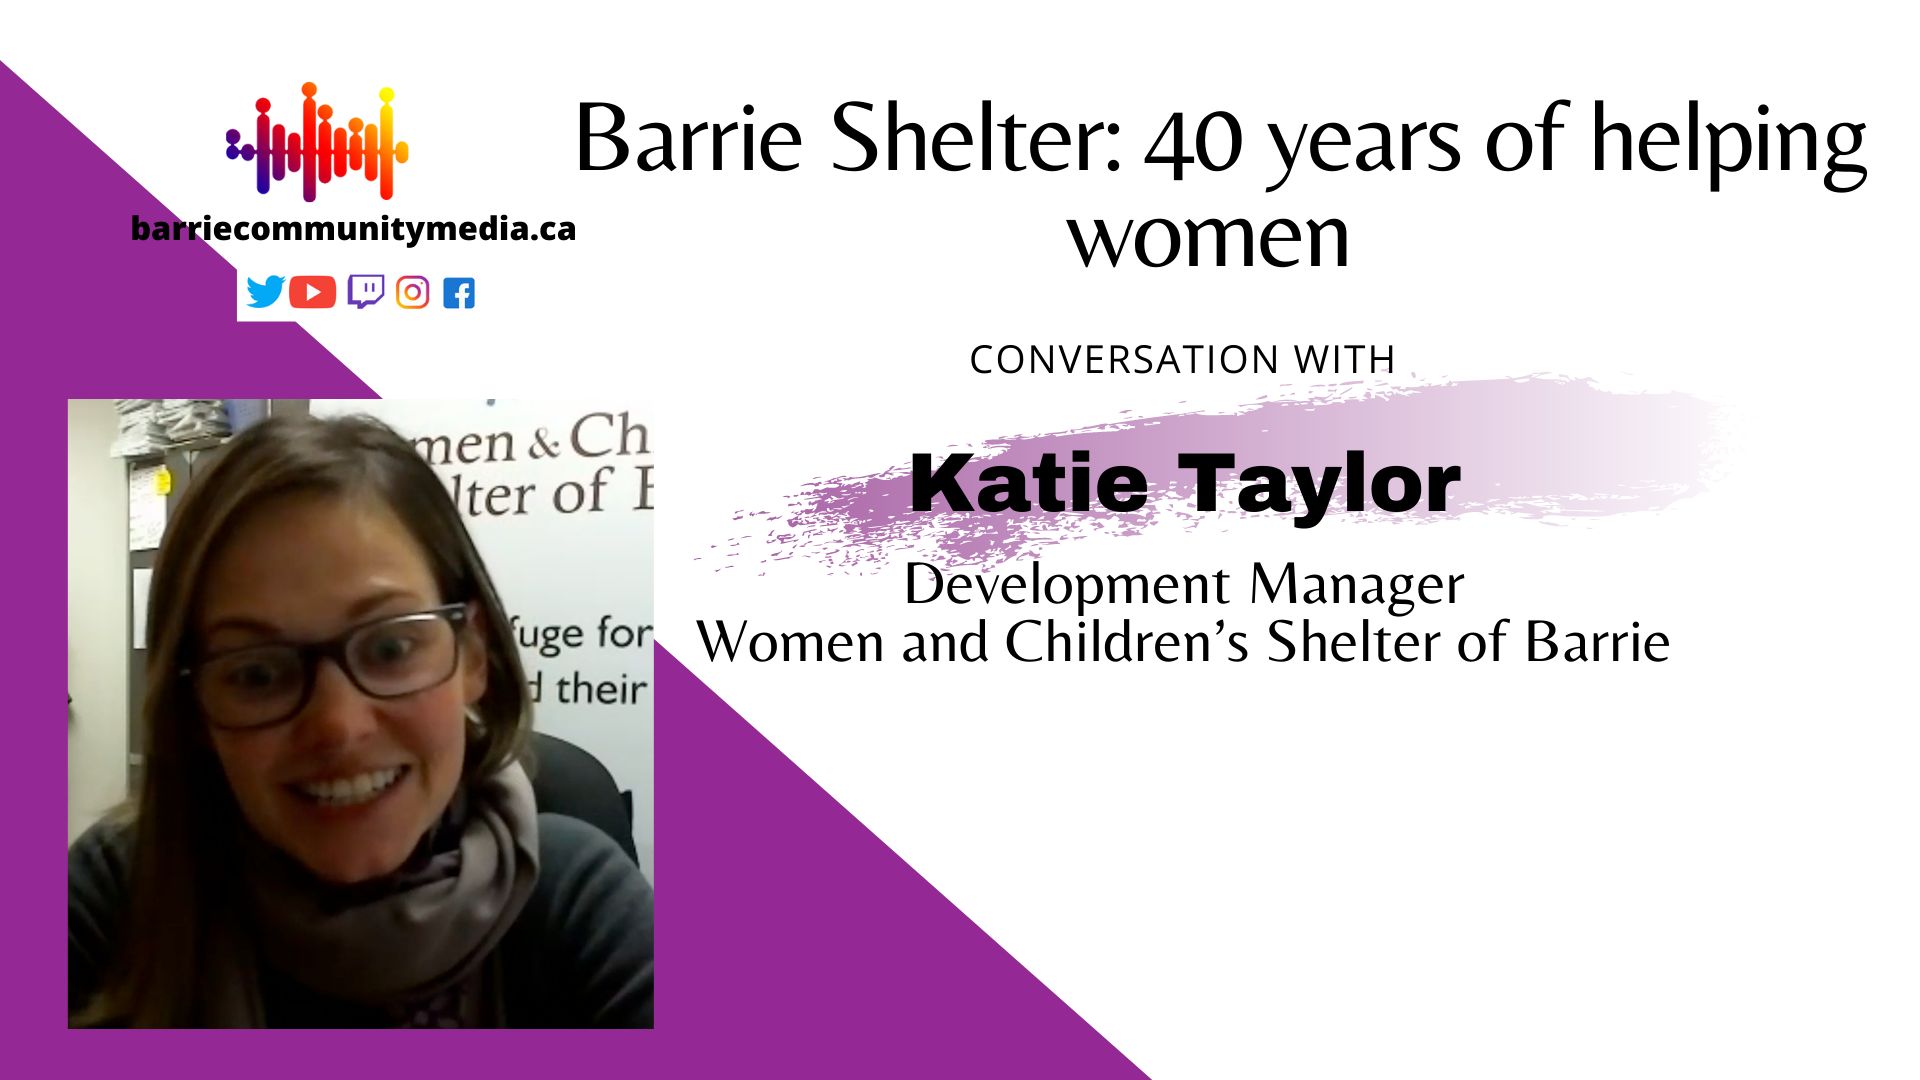 Barrie Shelter: 40 years of helping women